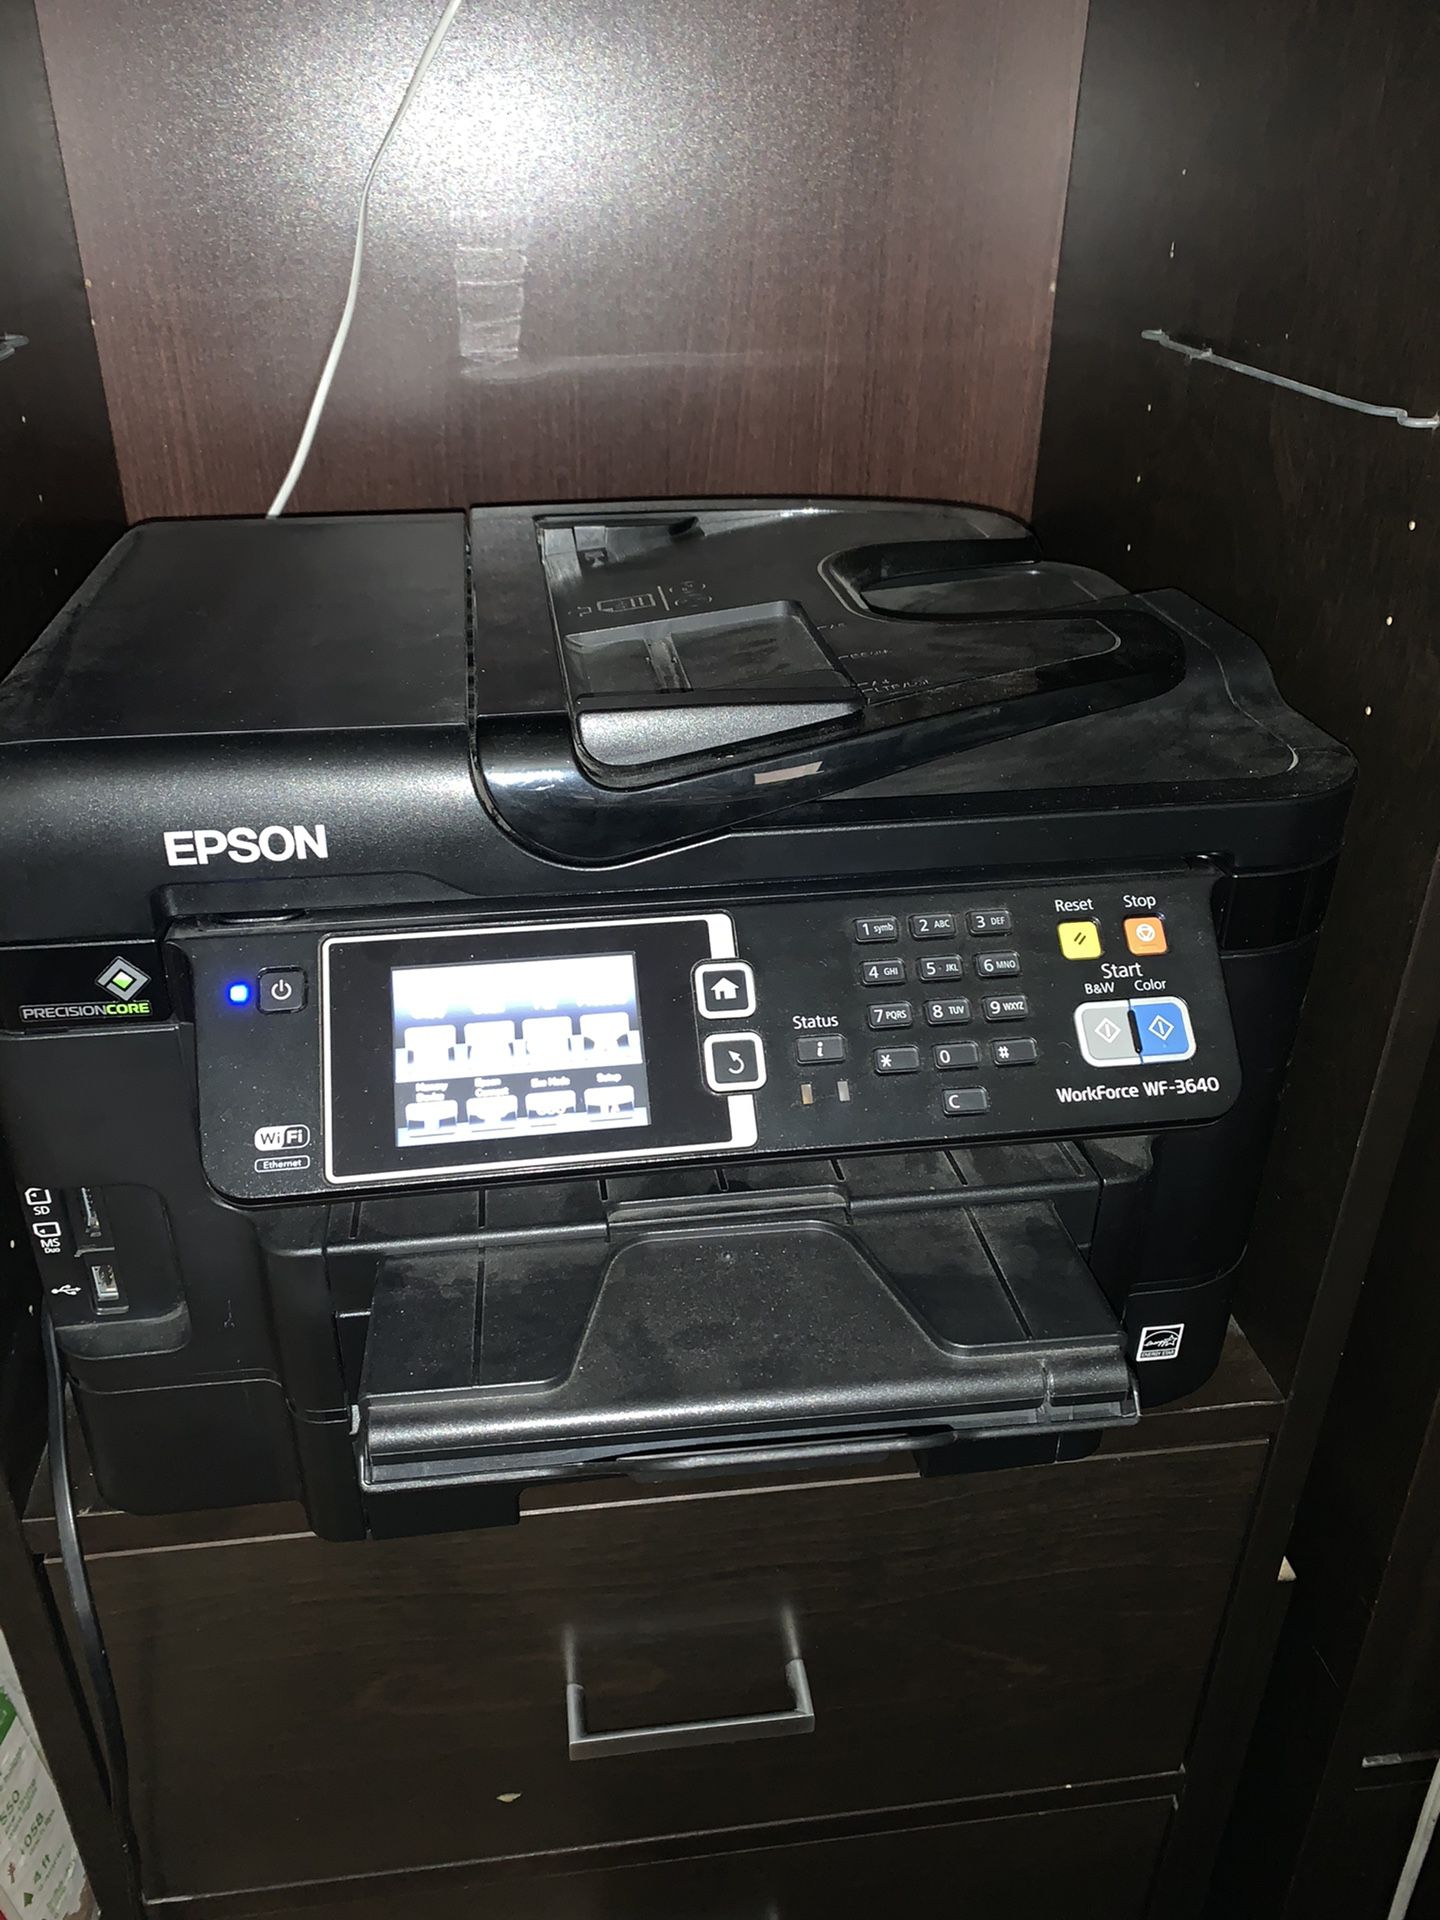 Epson All In One Printer Fax Scan Copy Wf 3640 For Sale In North Attleborough Ma Offerup 2636